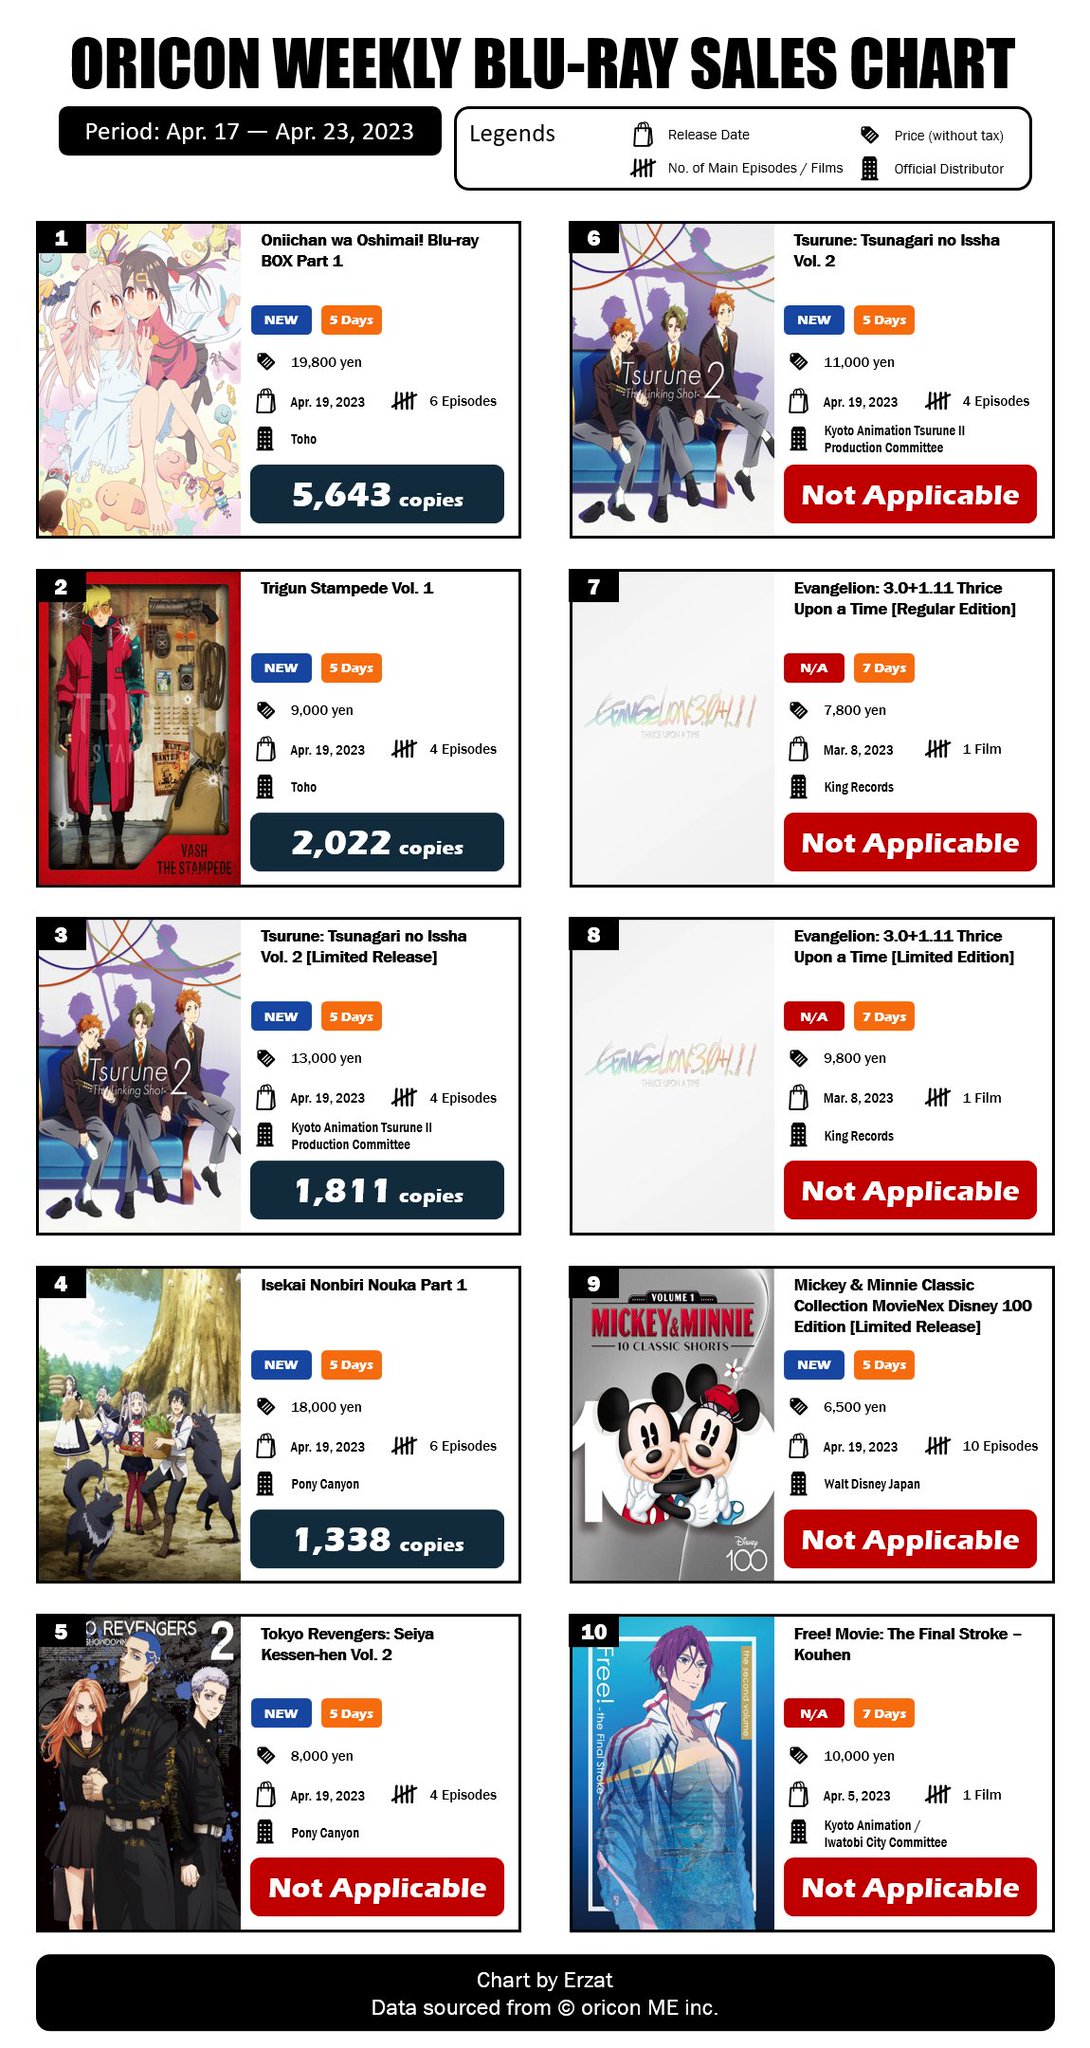 Japan Top 10 Weekly Anime Blu-ray and DVD Sales Ranking: December